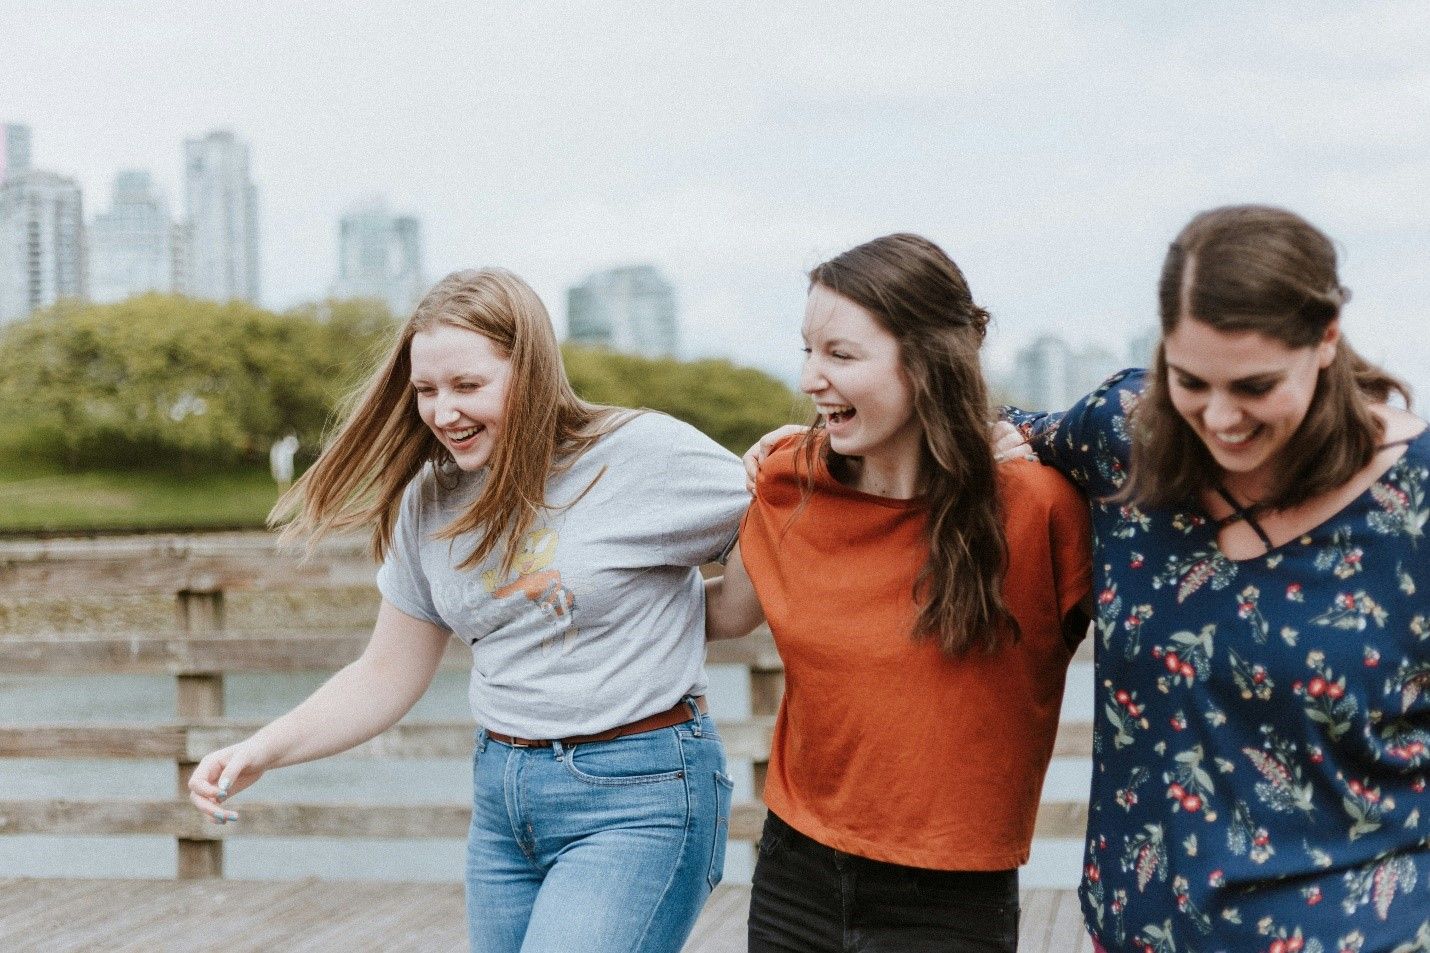 Three young women are walking on a wooden bridge and laughing.